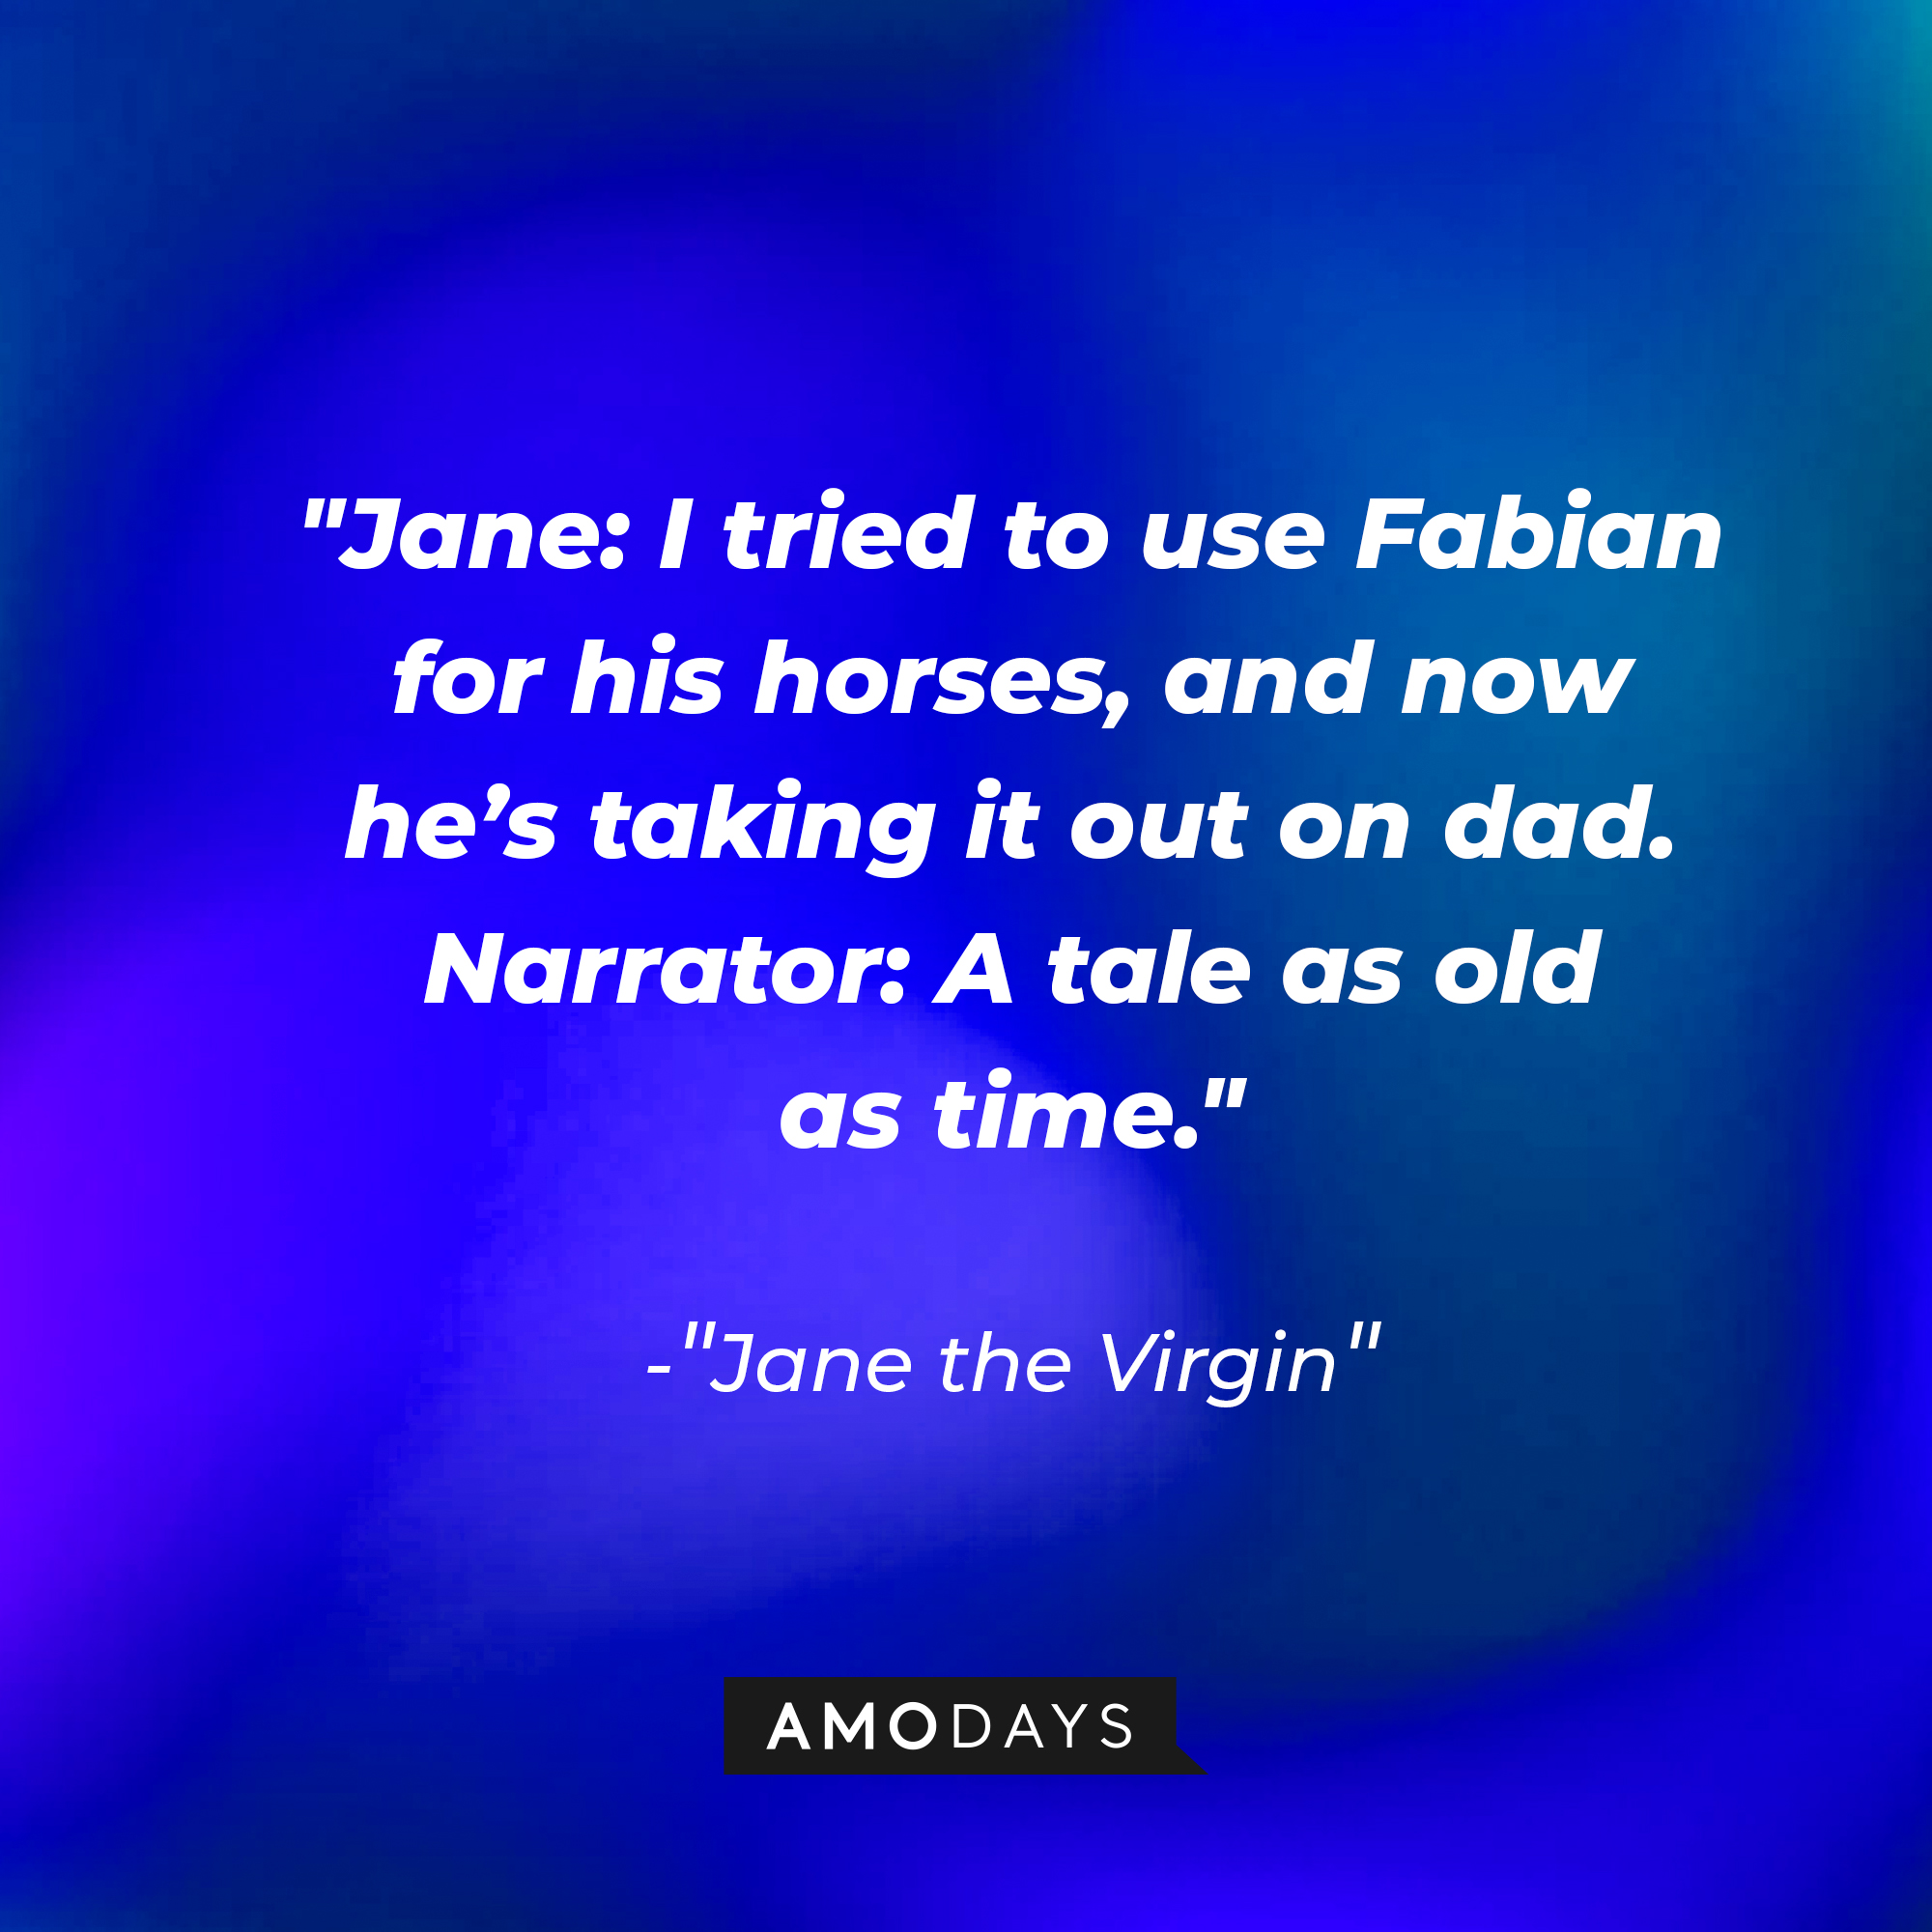 Jane Villanueva's dialogue in "Jane the Virgin:" "Jane: I tried to use Fabian for his horses, and now he’s taking it out on dad; Narrator: A tale as old as time." | Source: Amodays